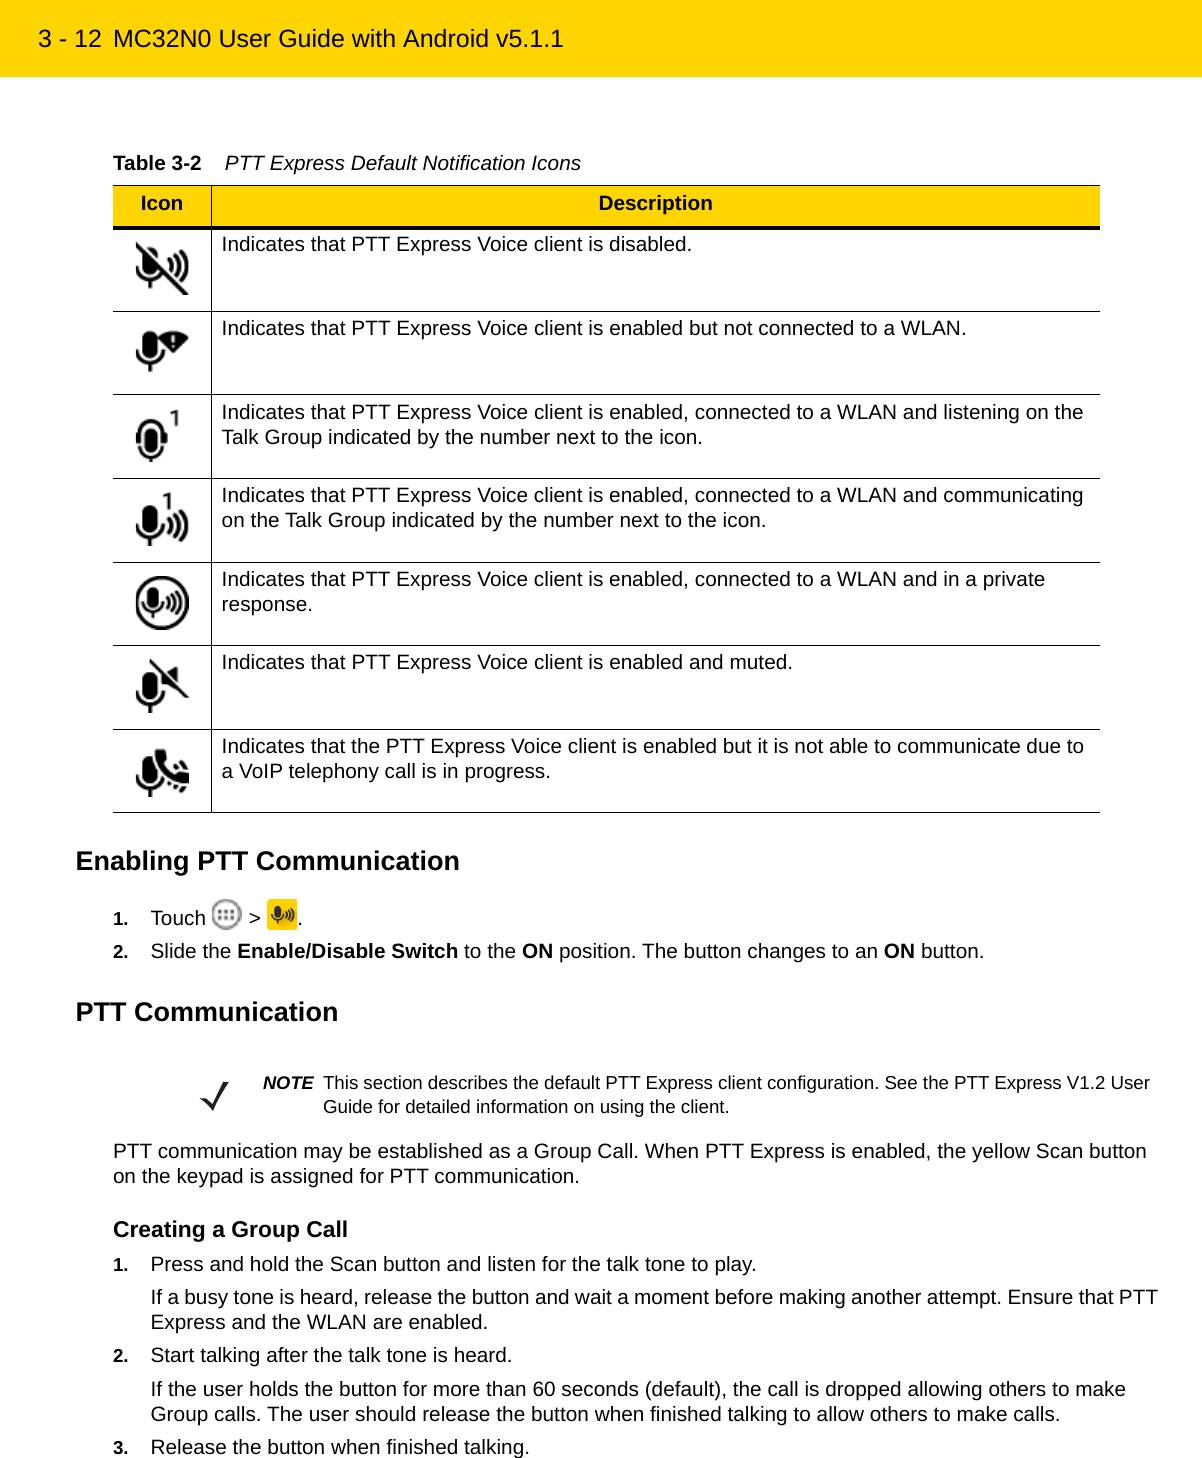 3 - 12 MC32N0 User Guide with Android v5.1.1Enabling PTT Communication1. Touch  &gt; .2. Slide the Enable/Disable Switch to the ON position. The button changes to an ON button.PTT CommunicationPTT communication may be established as a Group Call. When PTT Express is enabled, the yellow Scan button on the keypad is assigned for PTT communication.Creating a Group Call1. Press and hold the Scan button and listen for the talk tone to play.If a busy tone is heard, release the button and wait a moment before making another attempt. Ensure that PTT Express and the WLAN are enabled.2. Start talking after the talk tone is heard.If the user holds the button for more than 60 seconds (default), the call is dropped allowing others to make Group calls. The user should release the button when finished talking to allow others to make calls.3. Release the button when finished talking.Table 3-2    PTT Express Default Notification IconsIcon DescriptionIndicates that PTT Express Voice client is disabled.Indicates that PTT Express Voice client is enabled but not connected to a WLAN.Indicates that PTT Express Voice client is enabled, connected to a WLAN and listening on the Talk Group indicated by the number next to the icon.Indicates that PTT Express Voice client is enabled, connected to a WLAN and communicating on the Talk Group indicated by the number next to the icon.Indicates that PTT Express Voice client is enabled, connected to a WLAN and in a private response.Indicates that PTT Express Voice client is enabled and muted.Indicates that the PTT Express Voice client is enabled but it is not able to communicate due to a VoIP telephony call is in progress.NOTE This section describes the default PTT Express client configuration. See the PTT Express V1.2 User Guide for detailed information on using the client.REVIEW ONLY - REVIEW ONLY - REVIEW ONLY                             REVIEW ONLY - REVIEW ONLY - REVIEW ONLY